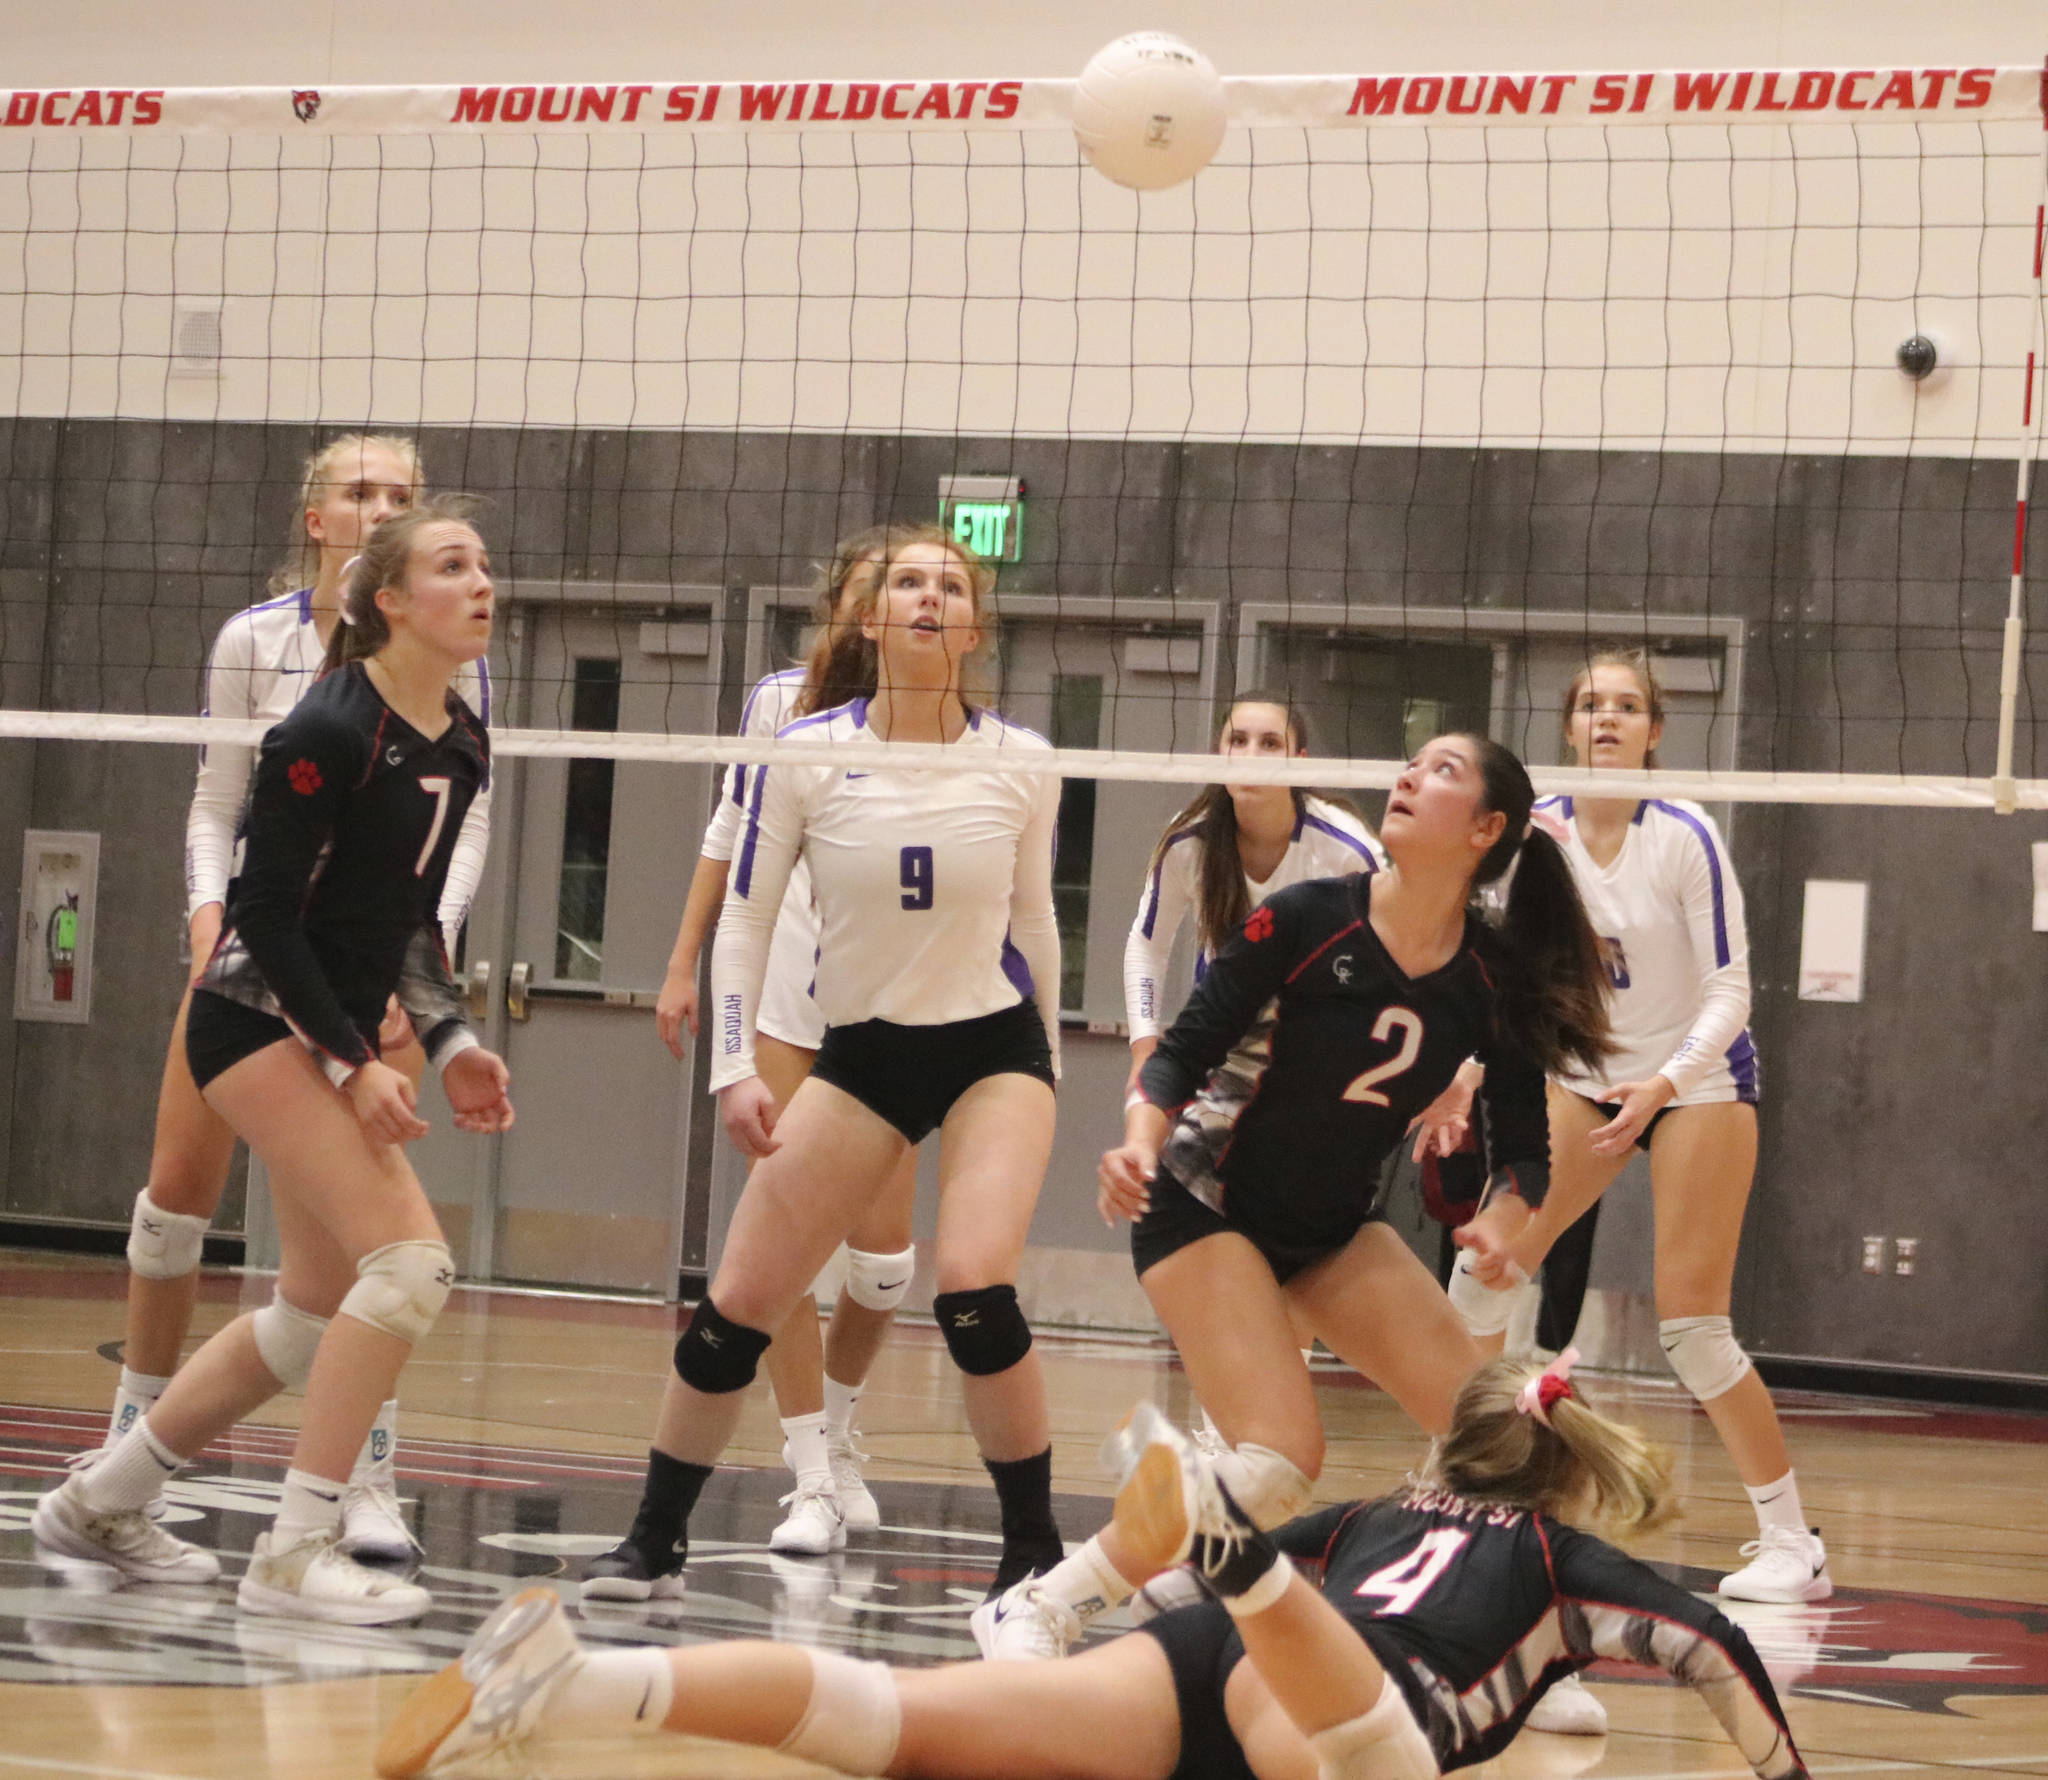 Mount Si volleyball players Megan Underbrink (7), Dana Dolan (2), Jade Petrzelka (4) and Issaquah’s Rachel Ratcliffe (9) watch the ball during a regular-season match. Mount Si defeated Issaquah in the 4A KingCo tournament semifinals, 25-21, 23-25, 25-19, 18-25, 15-7, on Nov. 2 and will play North Creek for the title at 7 p.m. on Nov. 5 at Skyline High. For Mount Si (14-3) against Issaquah, Dolan had 43 assists, Bailey Showalter had 27 kills and 28 digs, Breana Fitzgerald had 16 kills and 19 digs, Kaili Tachell had 16 digs and Petrzelka had 11 digs. Mount Si will then host the first round of the 4A Wes-King district tournament on Nov. 9. Benjamin Olson/ staff photo